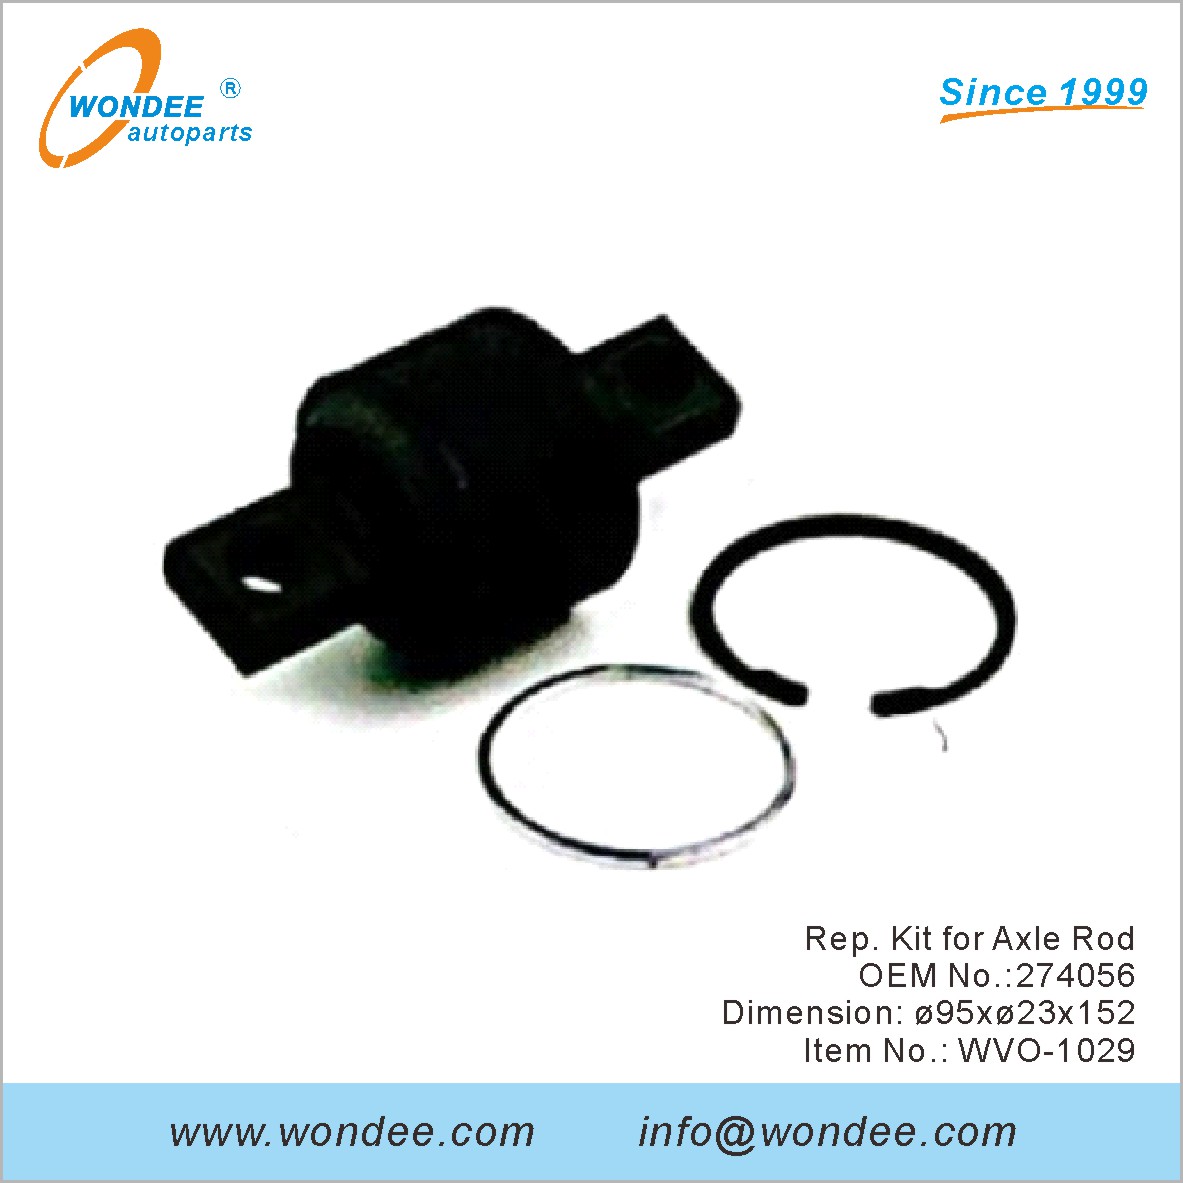 Volvo Type Rubber Bushing, Spring Buffer, Axle Rod Mounting,engine Mounting, Repair Kit, Oil Seal, Hub Cap for Truck